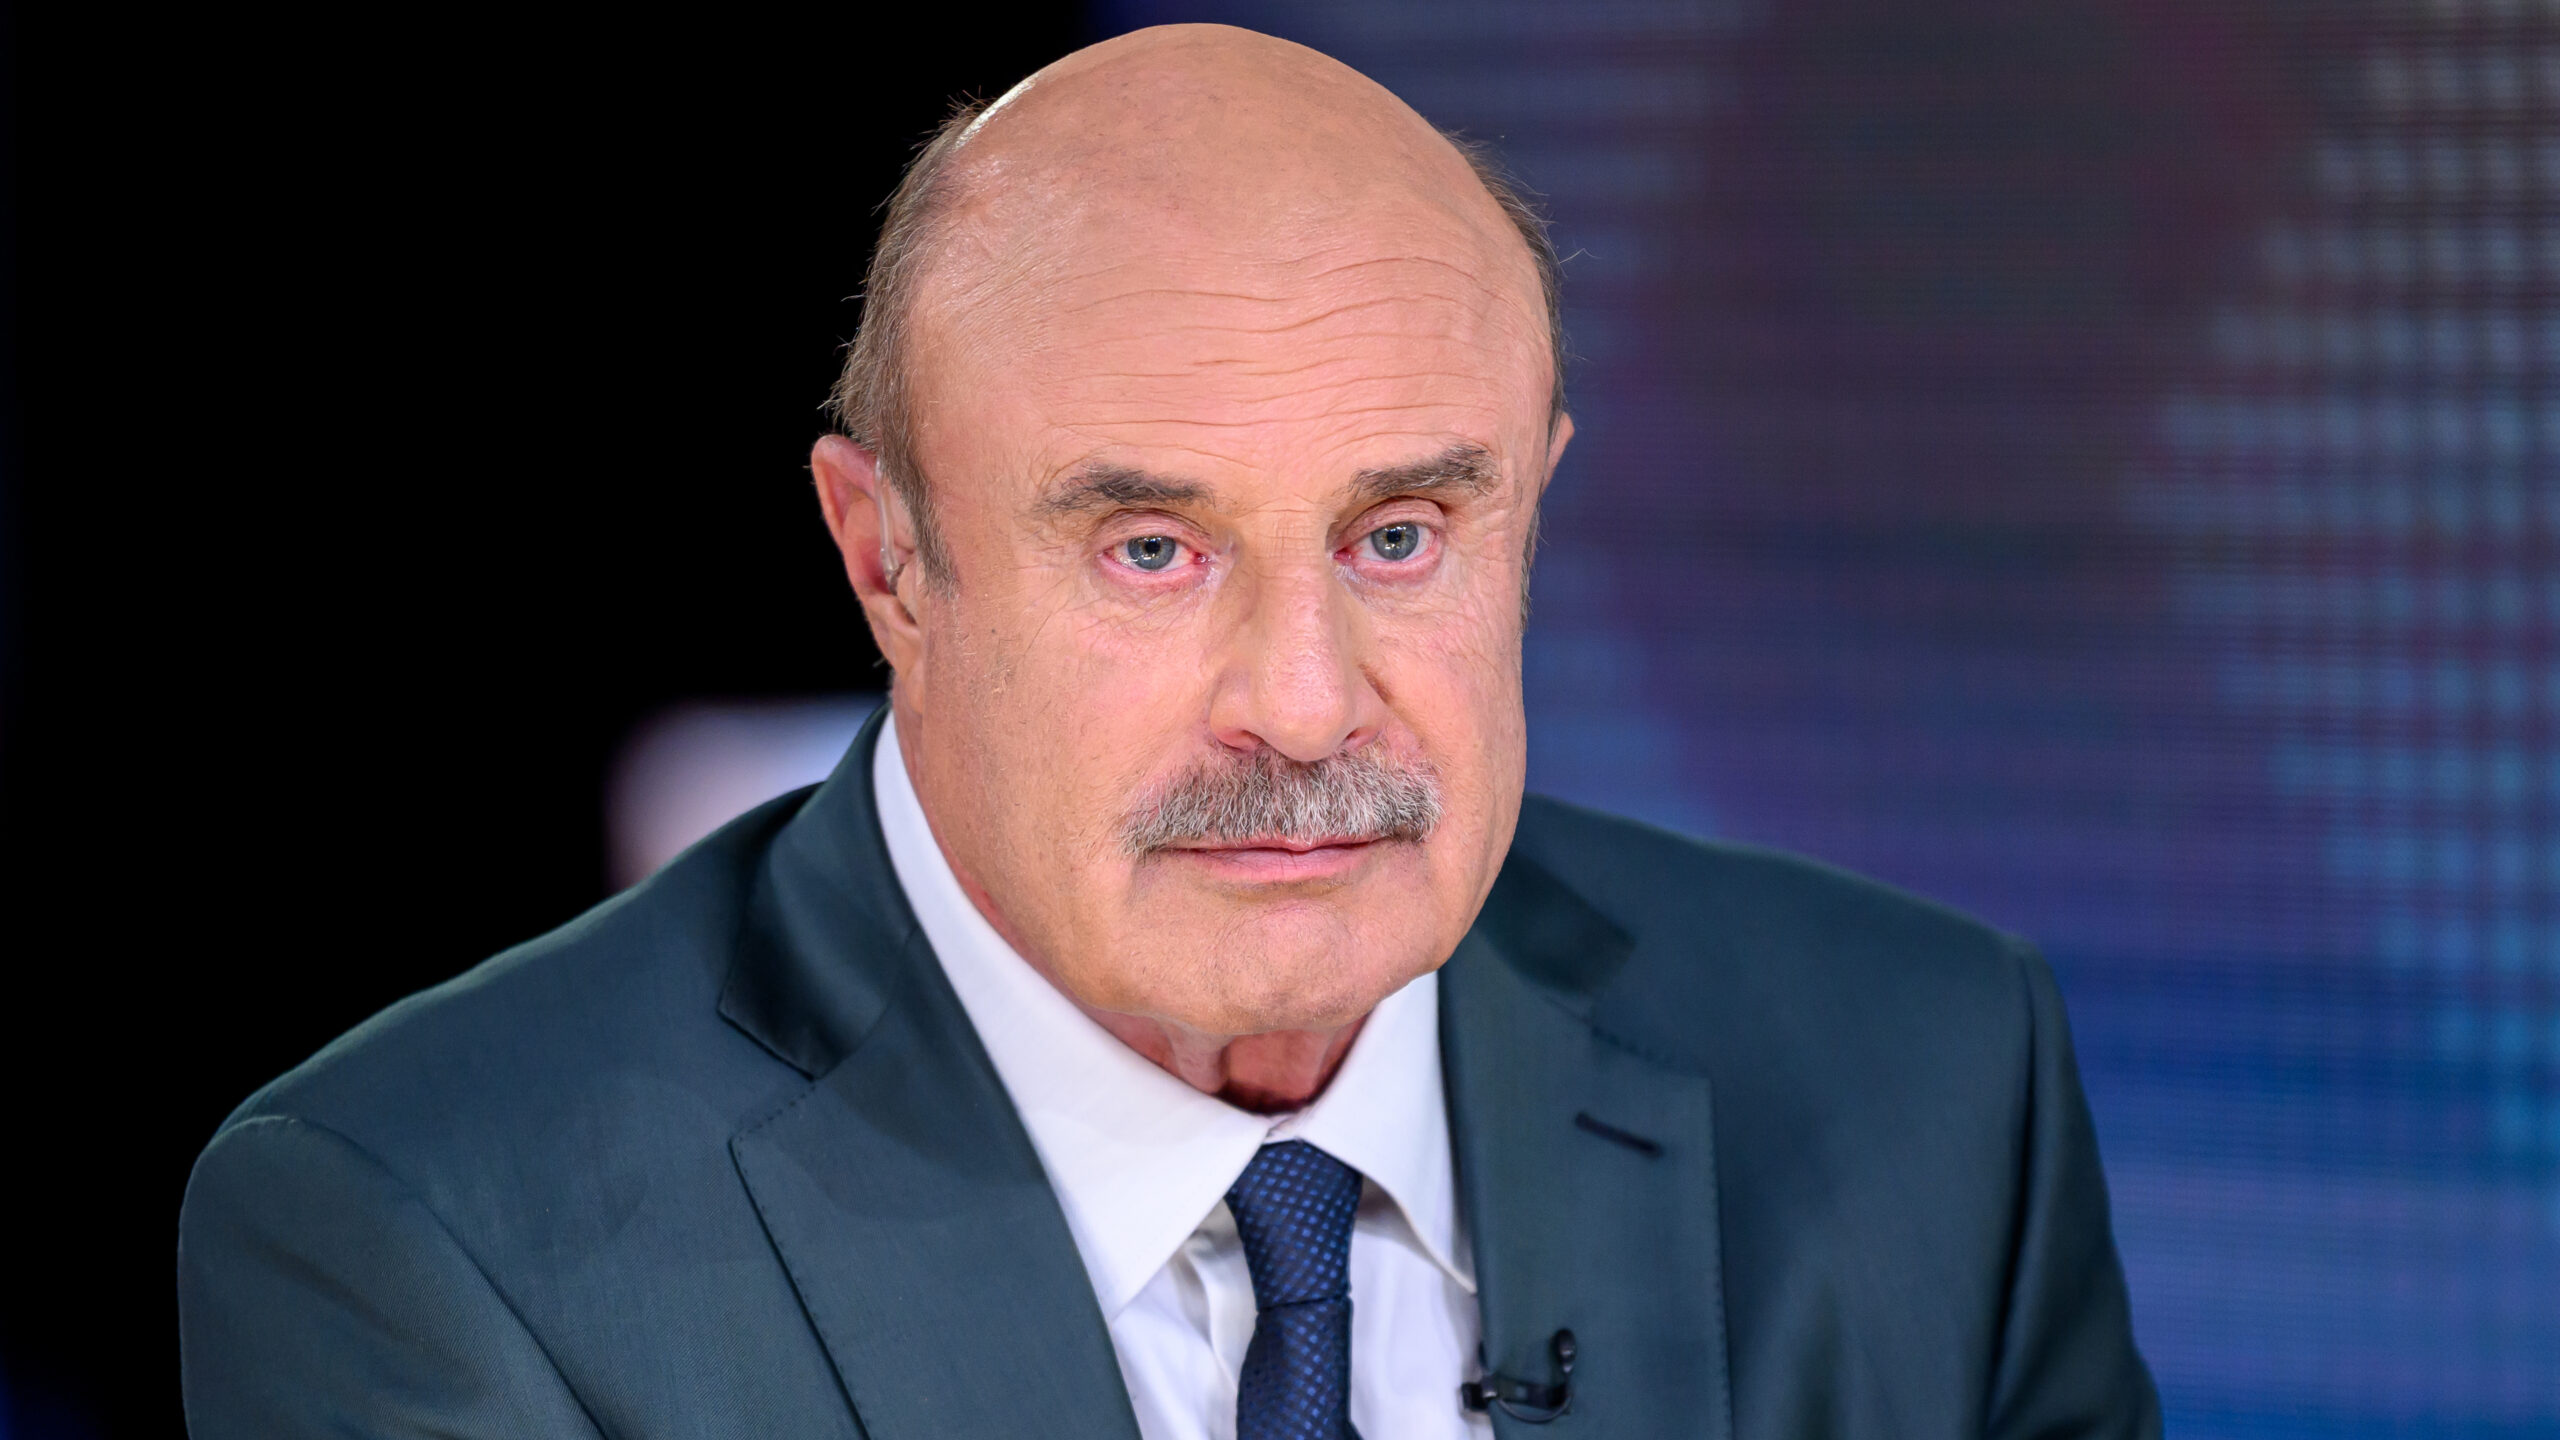 Dr. Phil implies Biden concealing truth on cognitive health: ‘Transparency reveals innocence